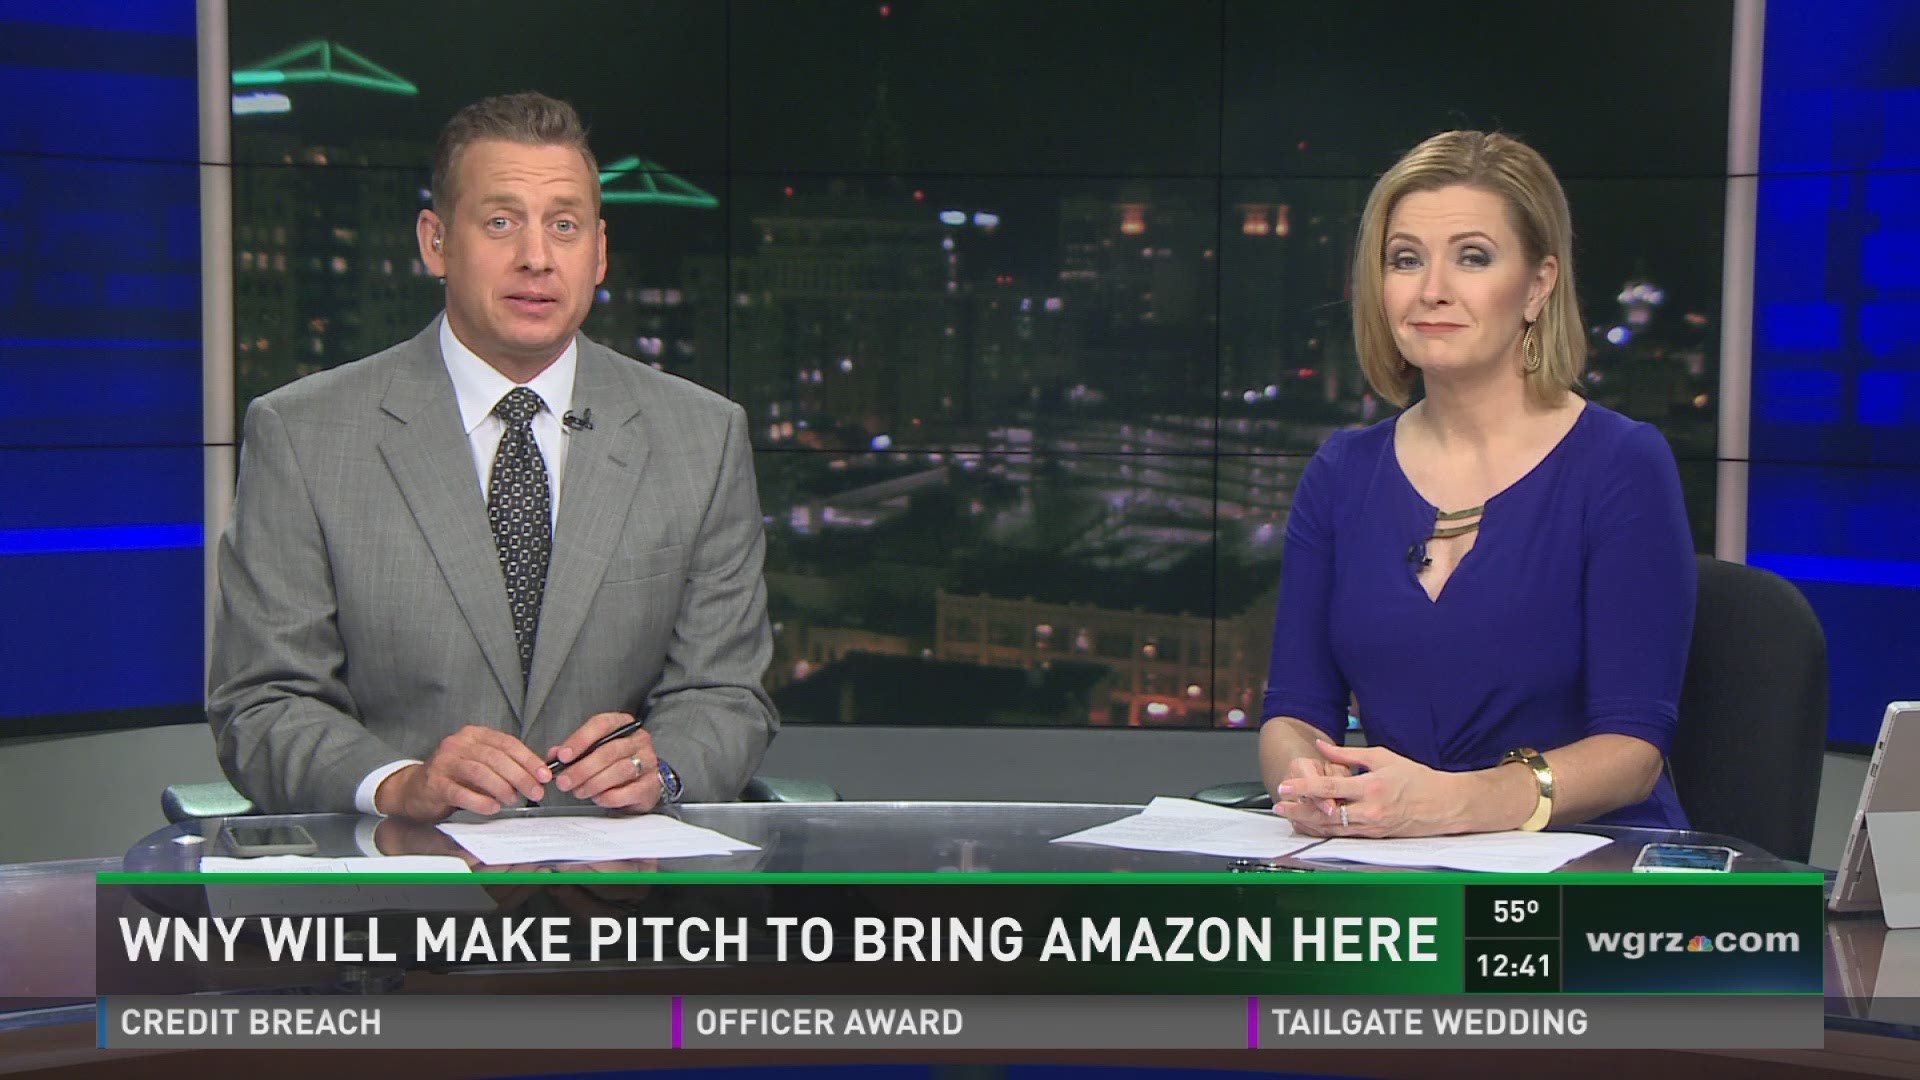 WNY Will Make Pitch To Bring Amazon Here